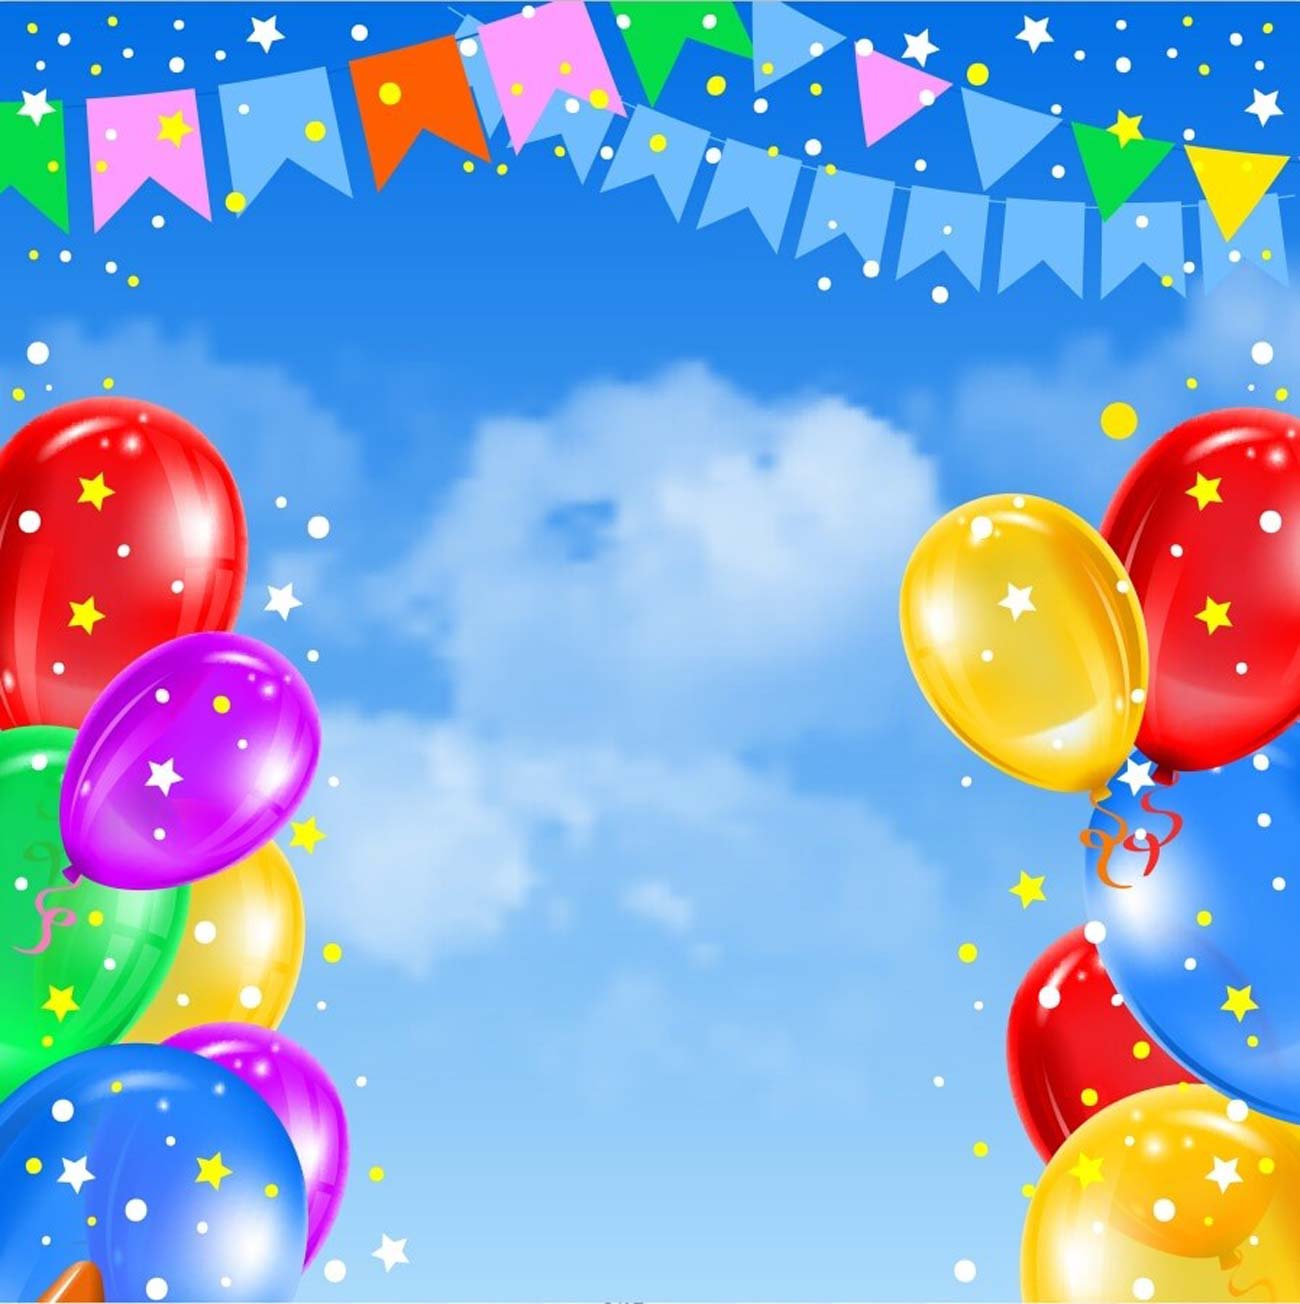 New Happy Birthday Background Flags Full HD Stock Image